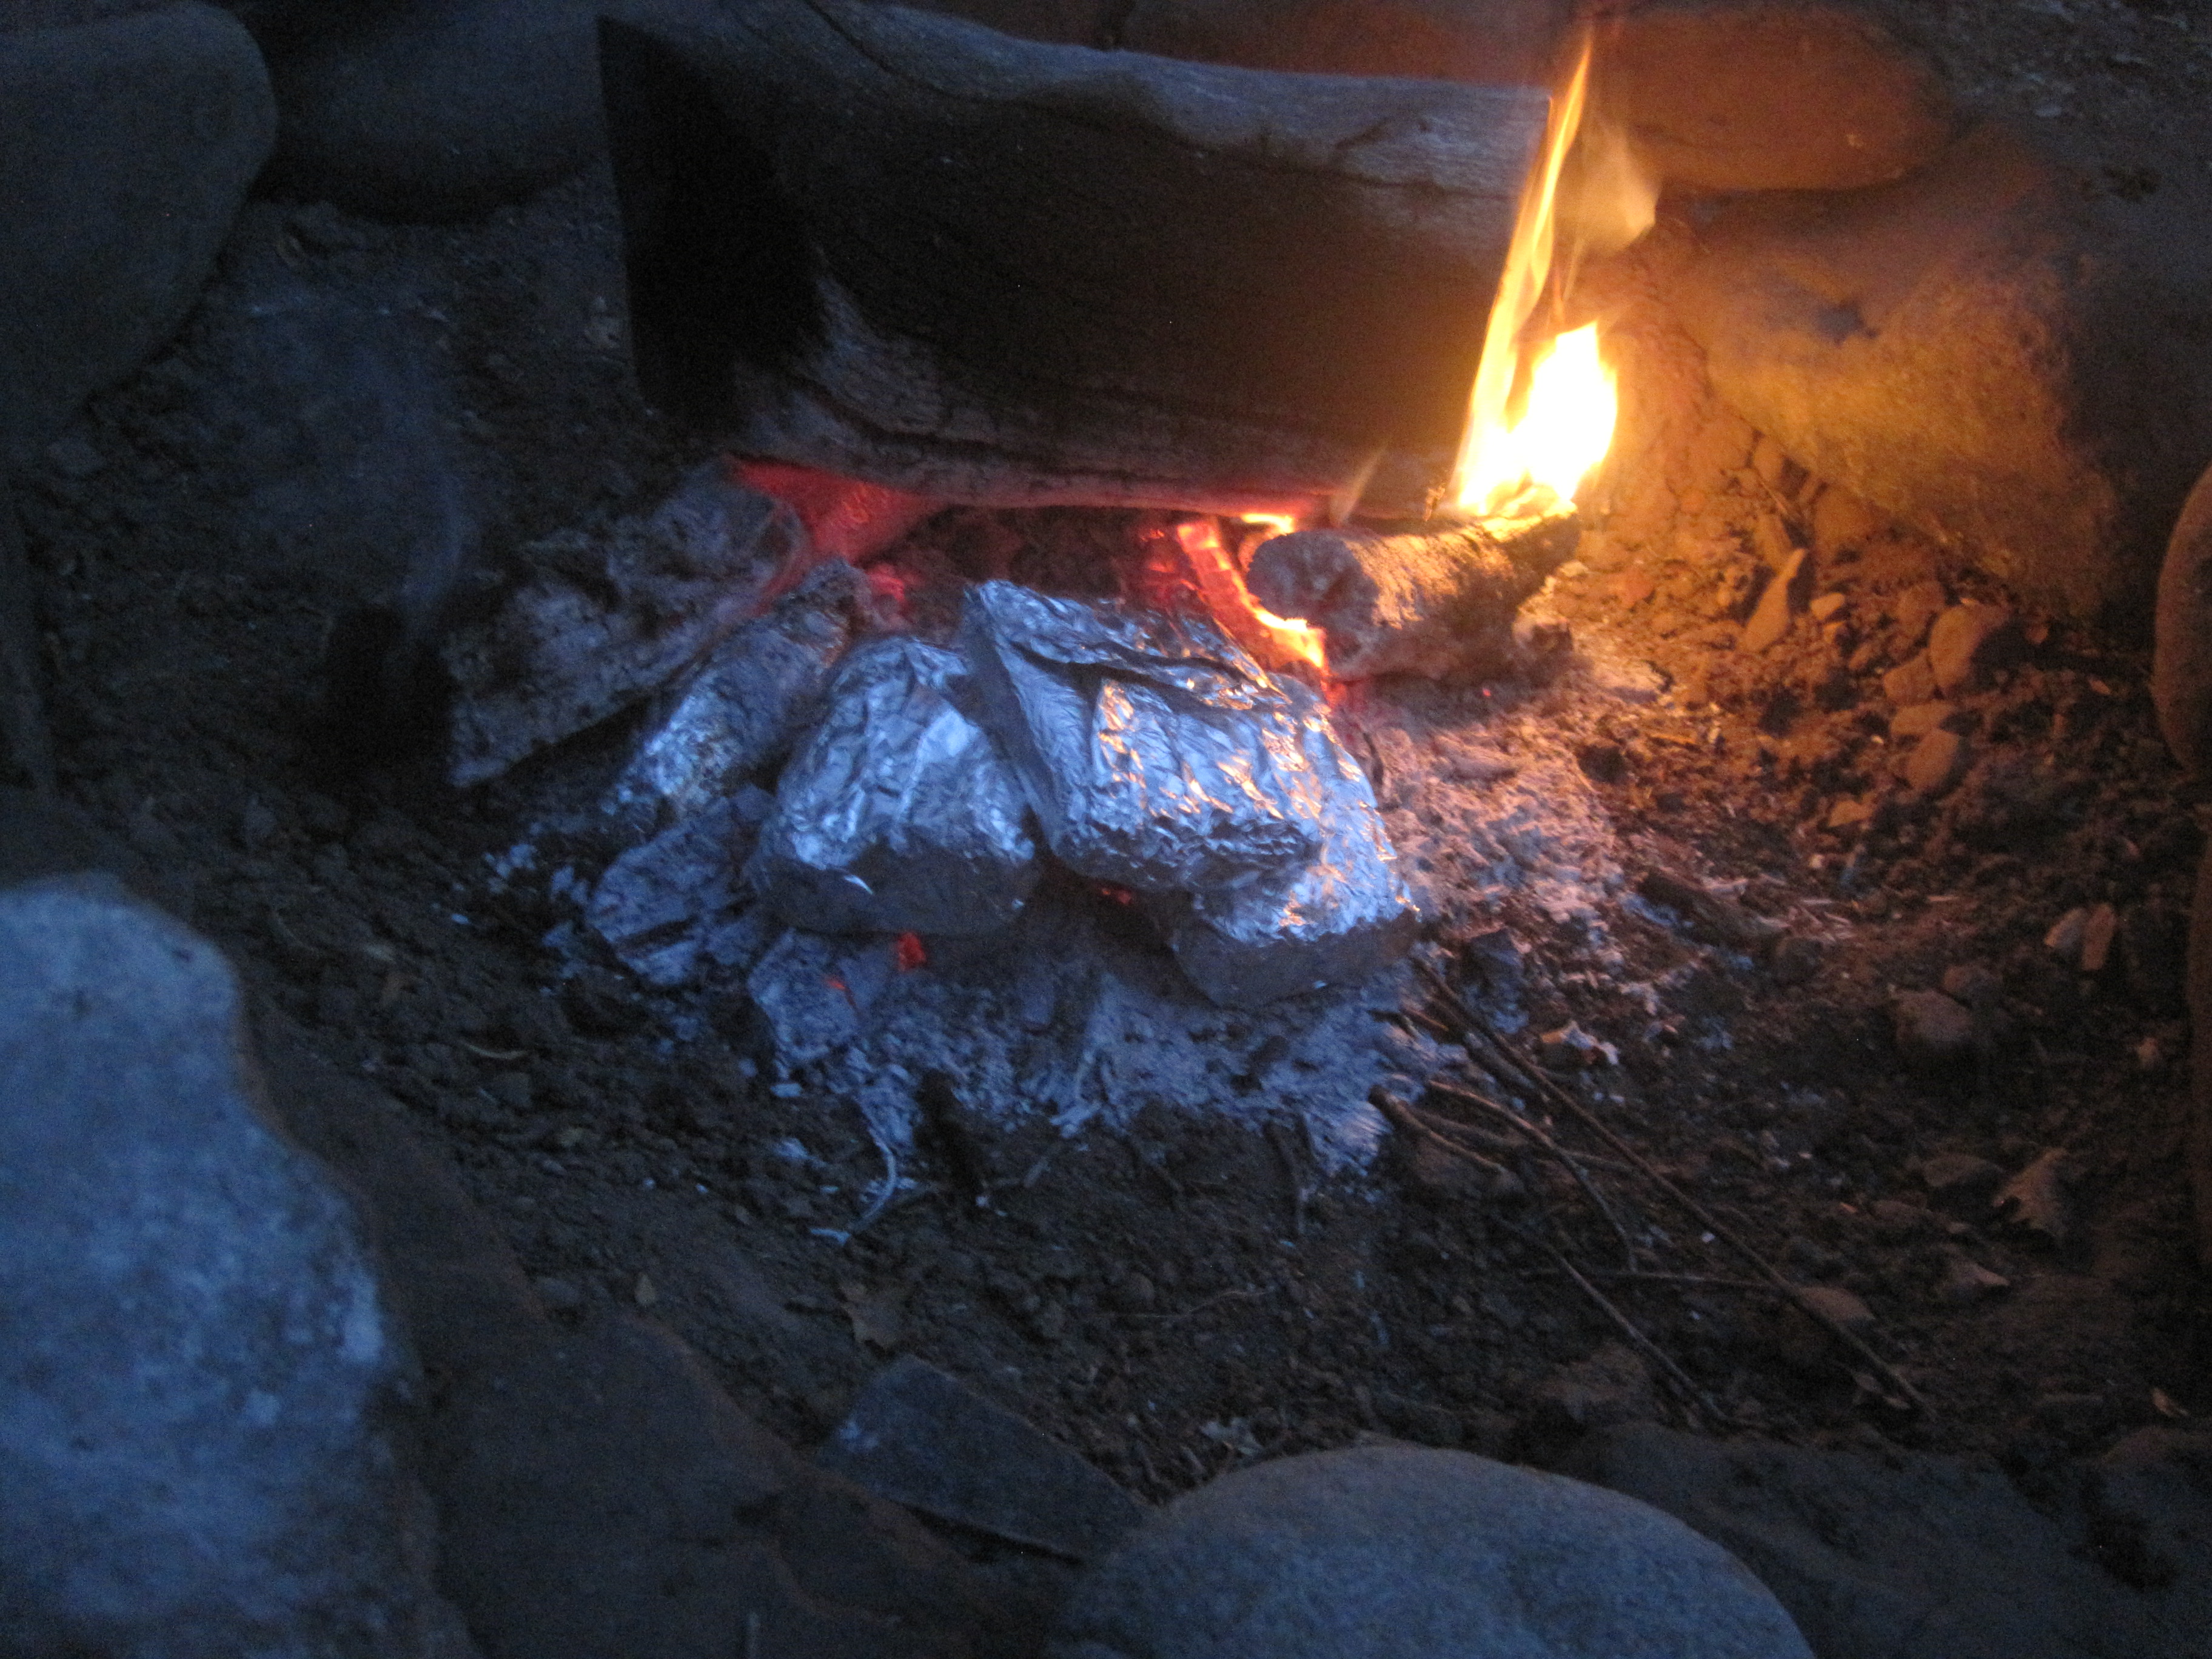 Corn and sausages cooked in tin foil over a fire.